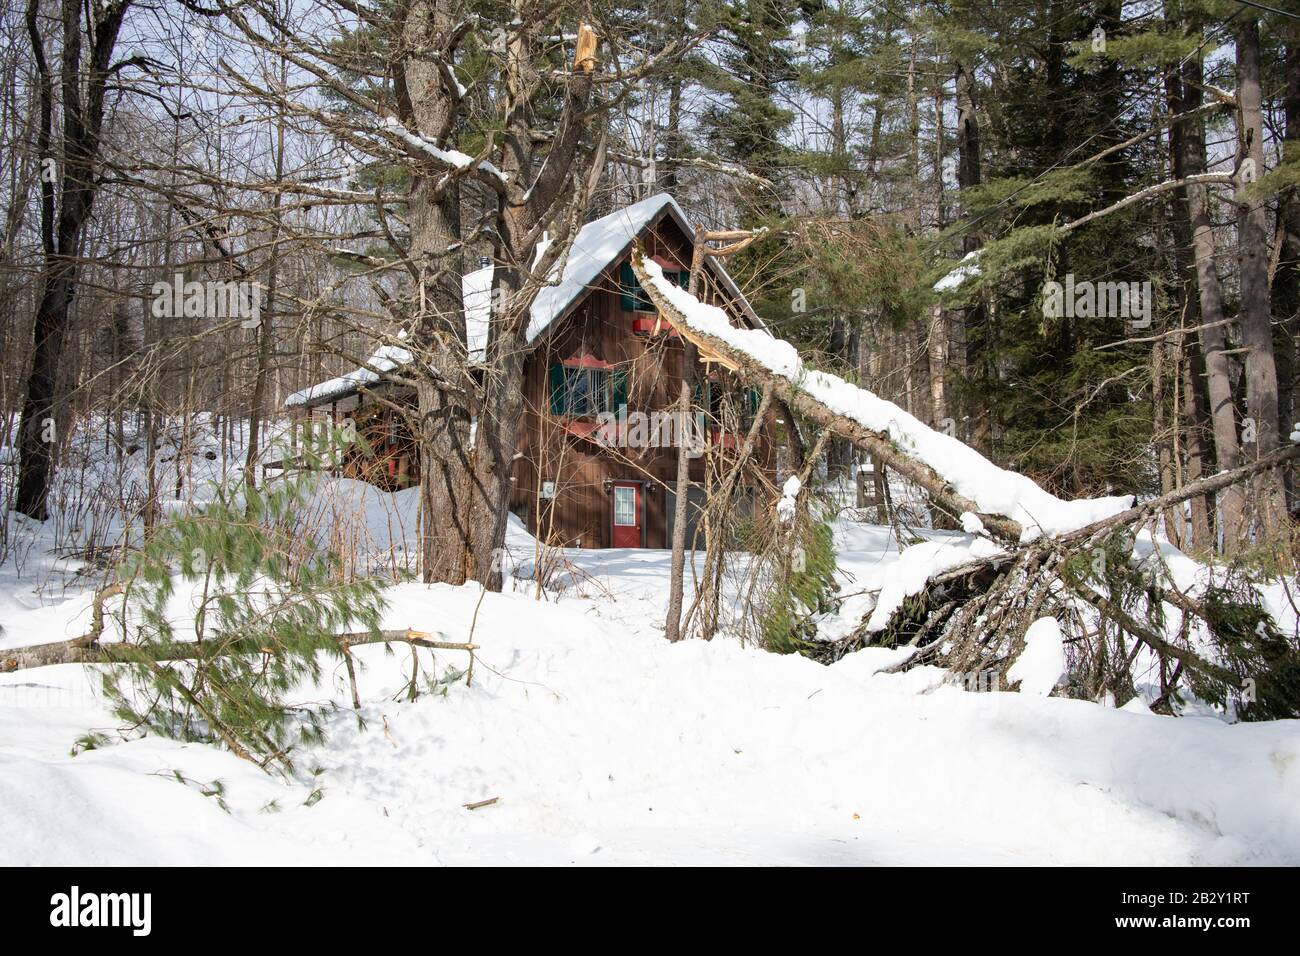 A large evergreen tree branch broken off during a snow storm in front of a cabin in the Adirondack Mountains wilderness. Stock Photo